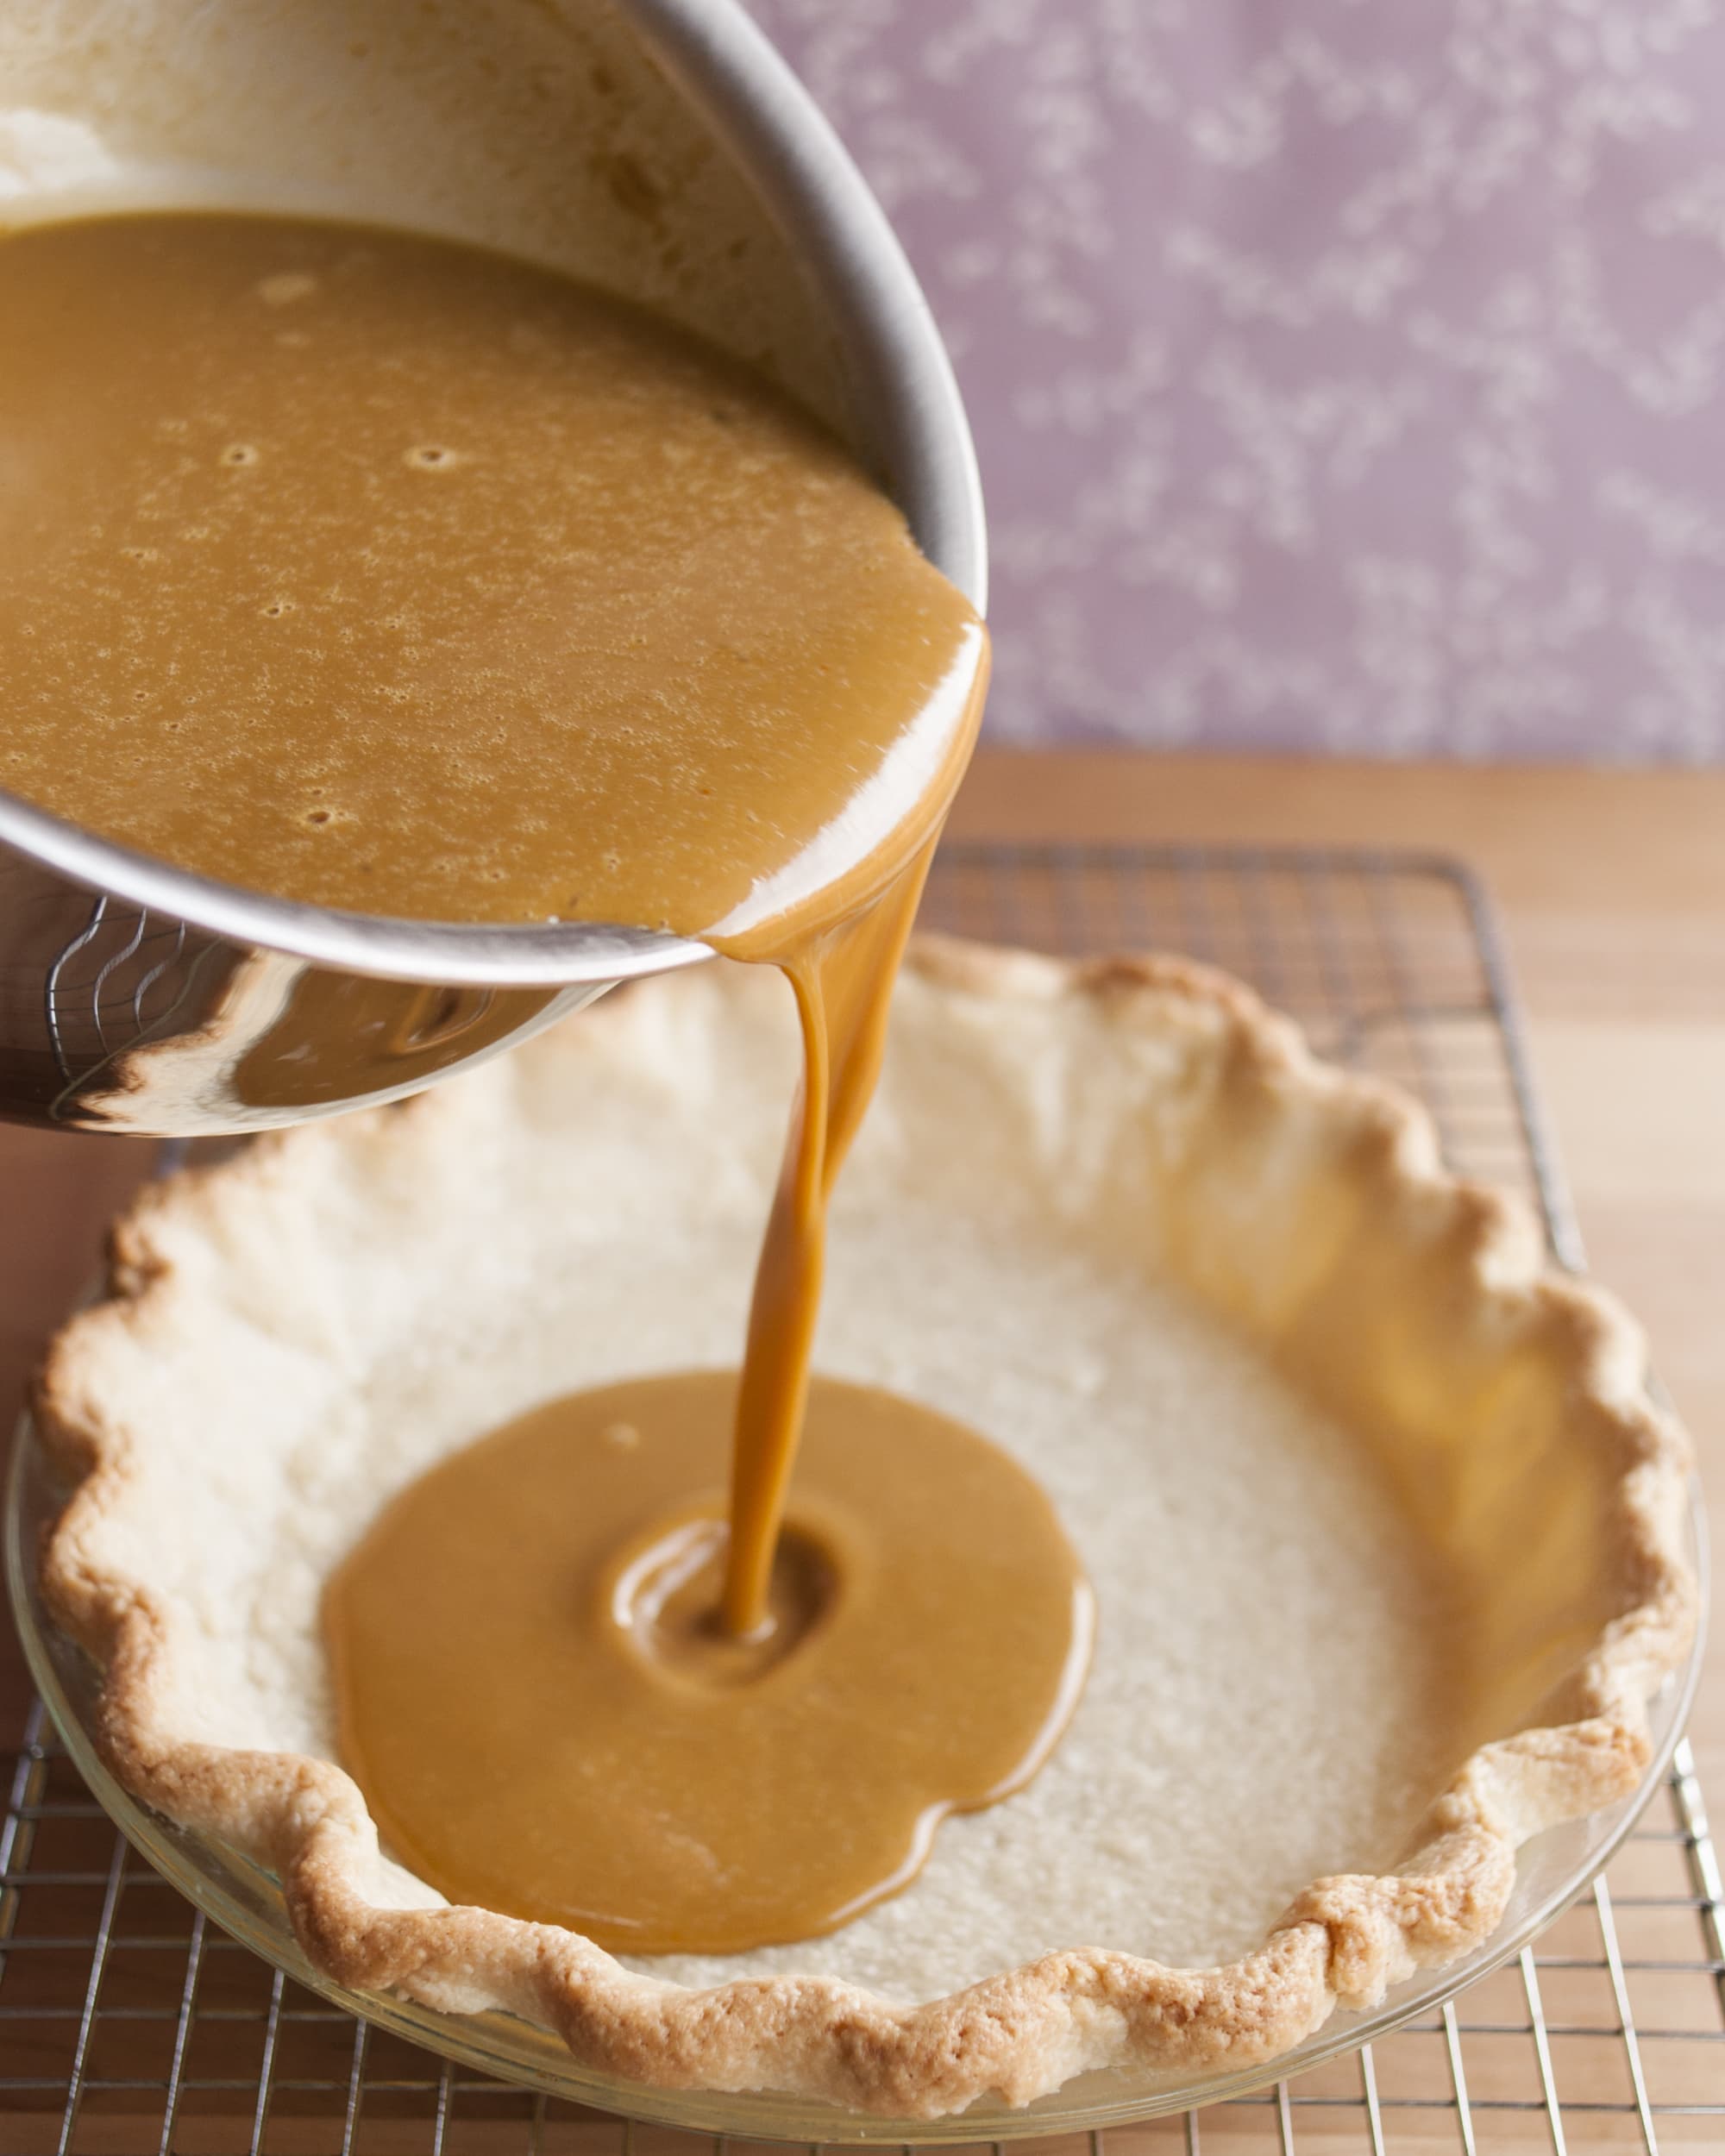 How To Blind Bake A Pie Crust: Easy Pre-Baking Step-By ...